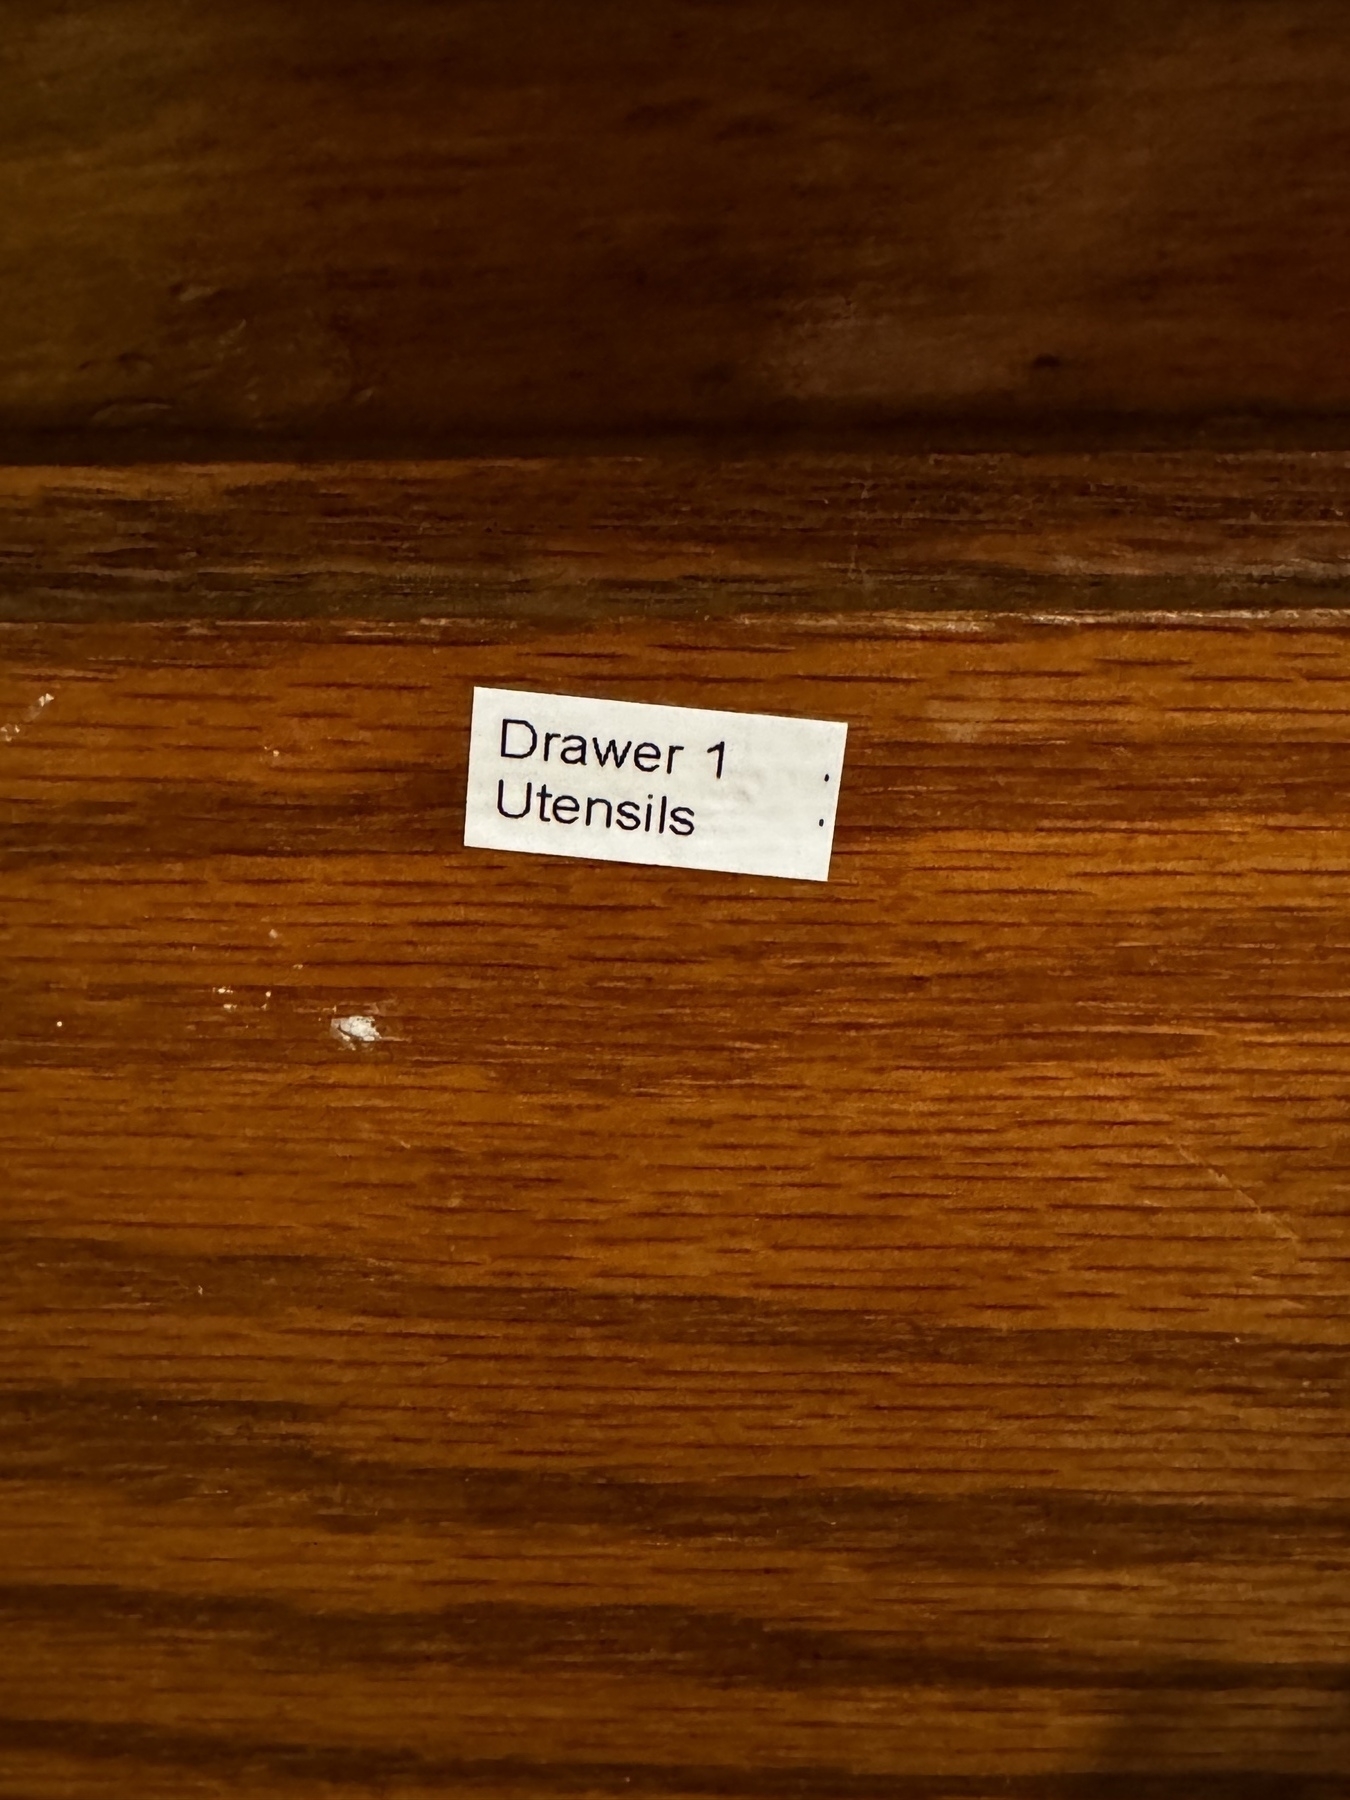 A small white label with black text reading "Drawer 1 Utensils" is adhered to a woodgrain surface.